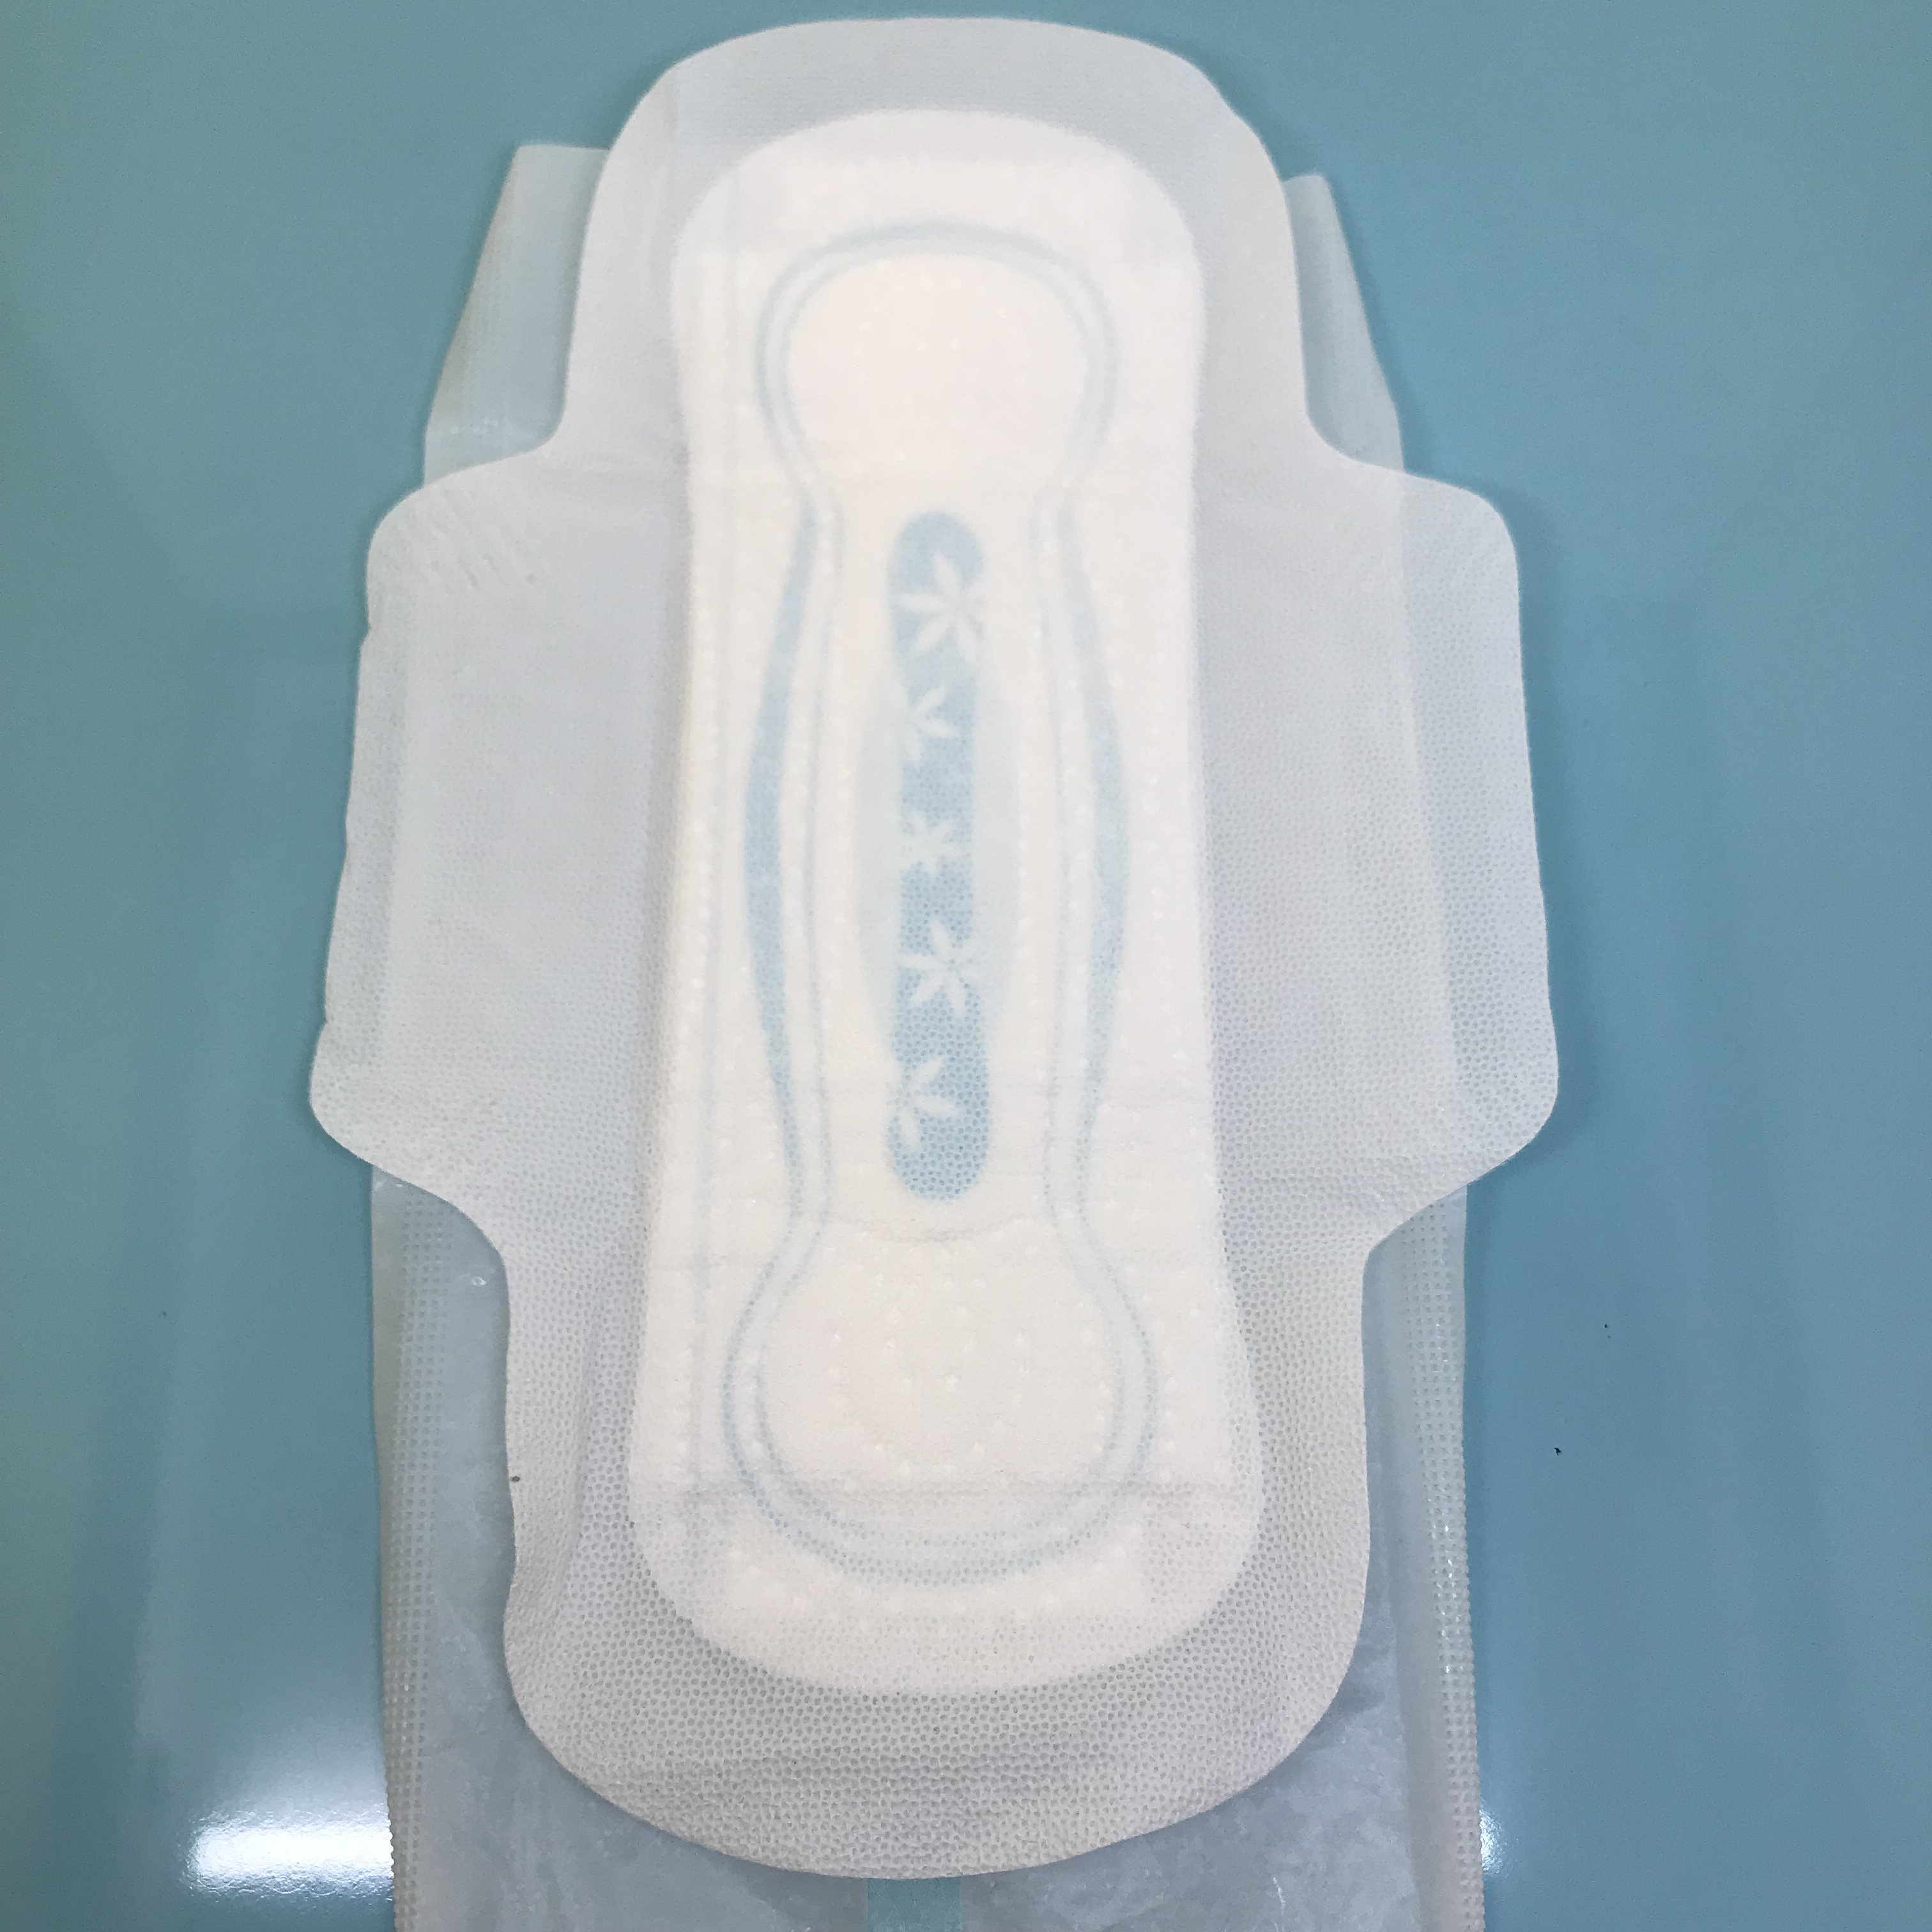 Professional China Sanitary Napkin Holder -
 Soft touch cotton young girl sanitary napkin Quanzhou manufacturer – Union Paper